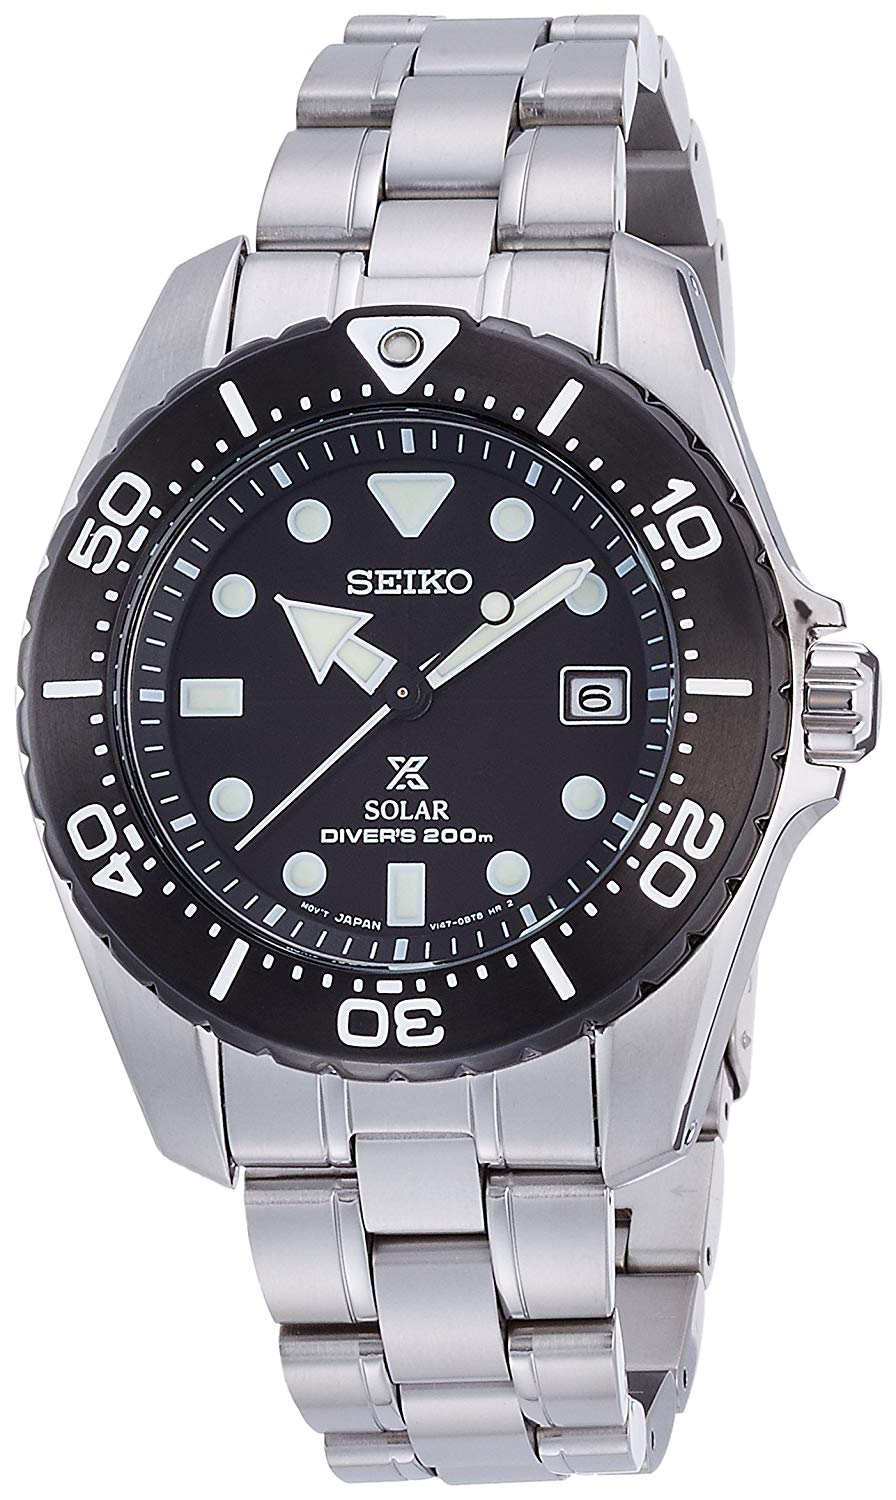 SBDN019 watch in SEIKO PROSPEX Solar Divers 200m - Discovery Japan Mall